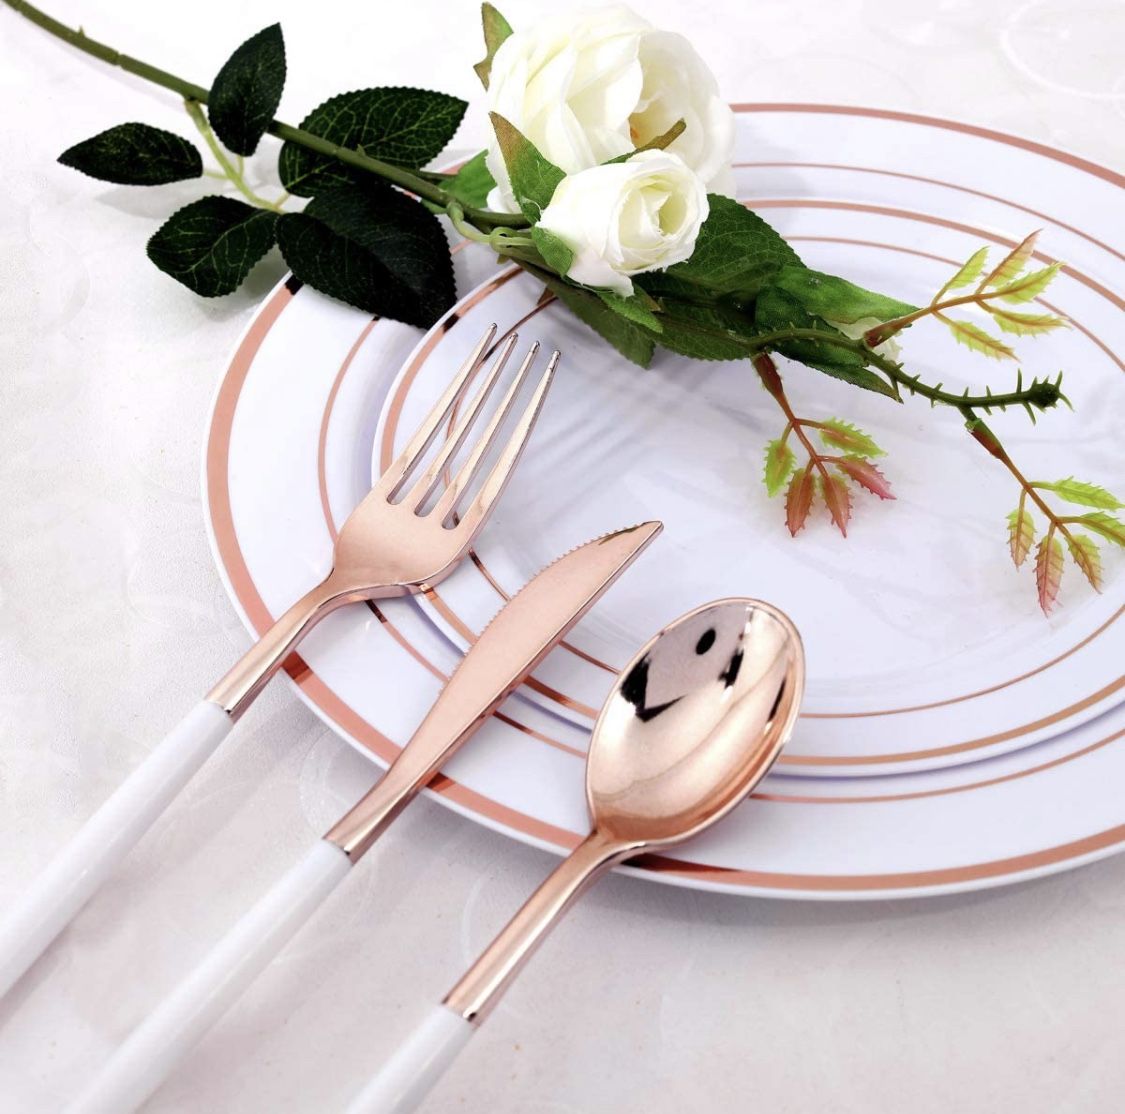 288 Pieces Heavy Duty Disposable Rose Gold Flatware - Forks, Knives, Spoons